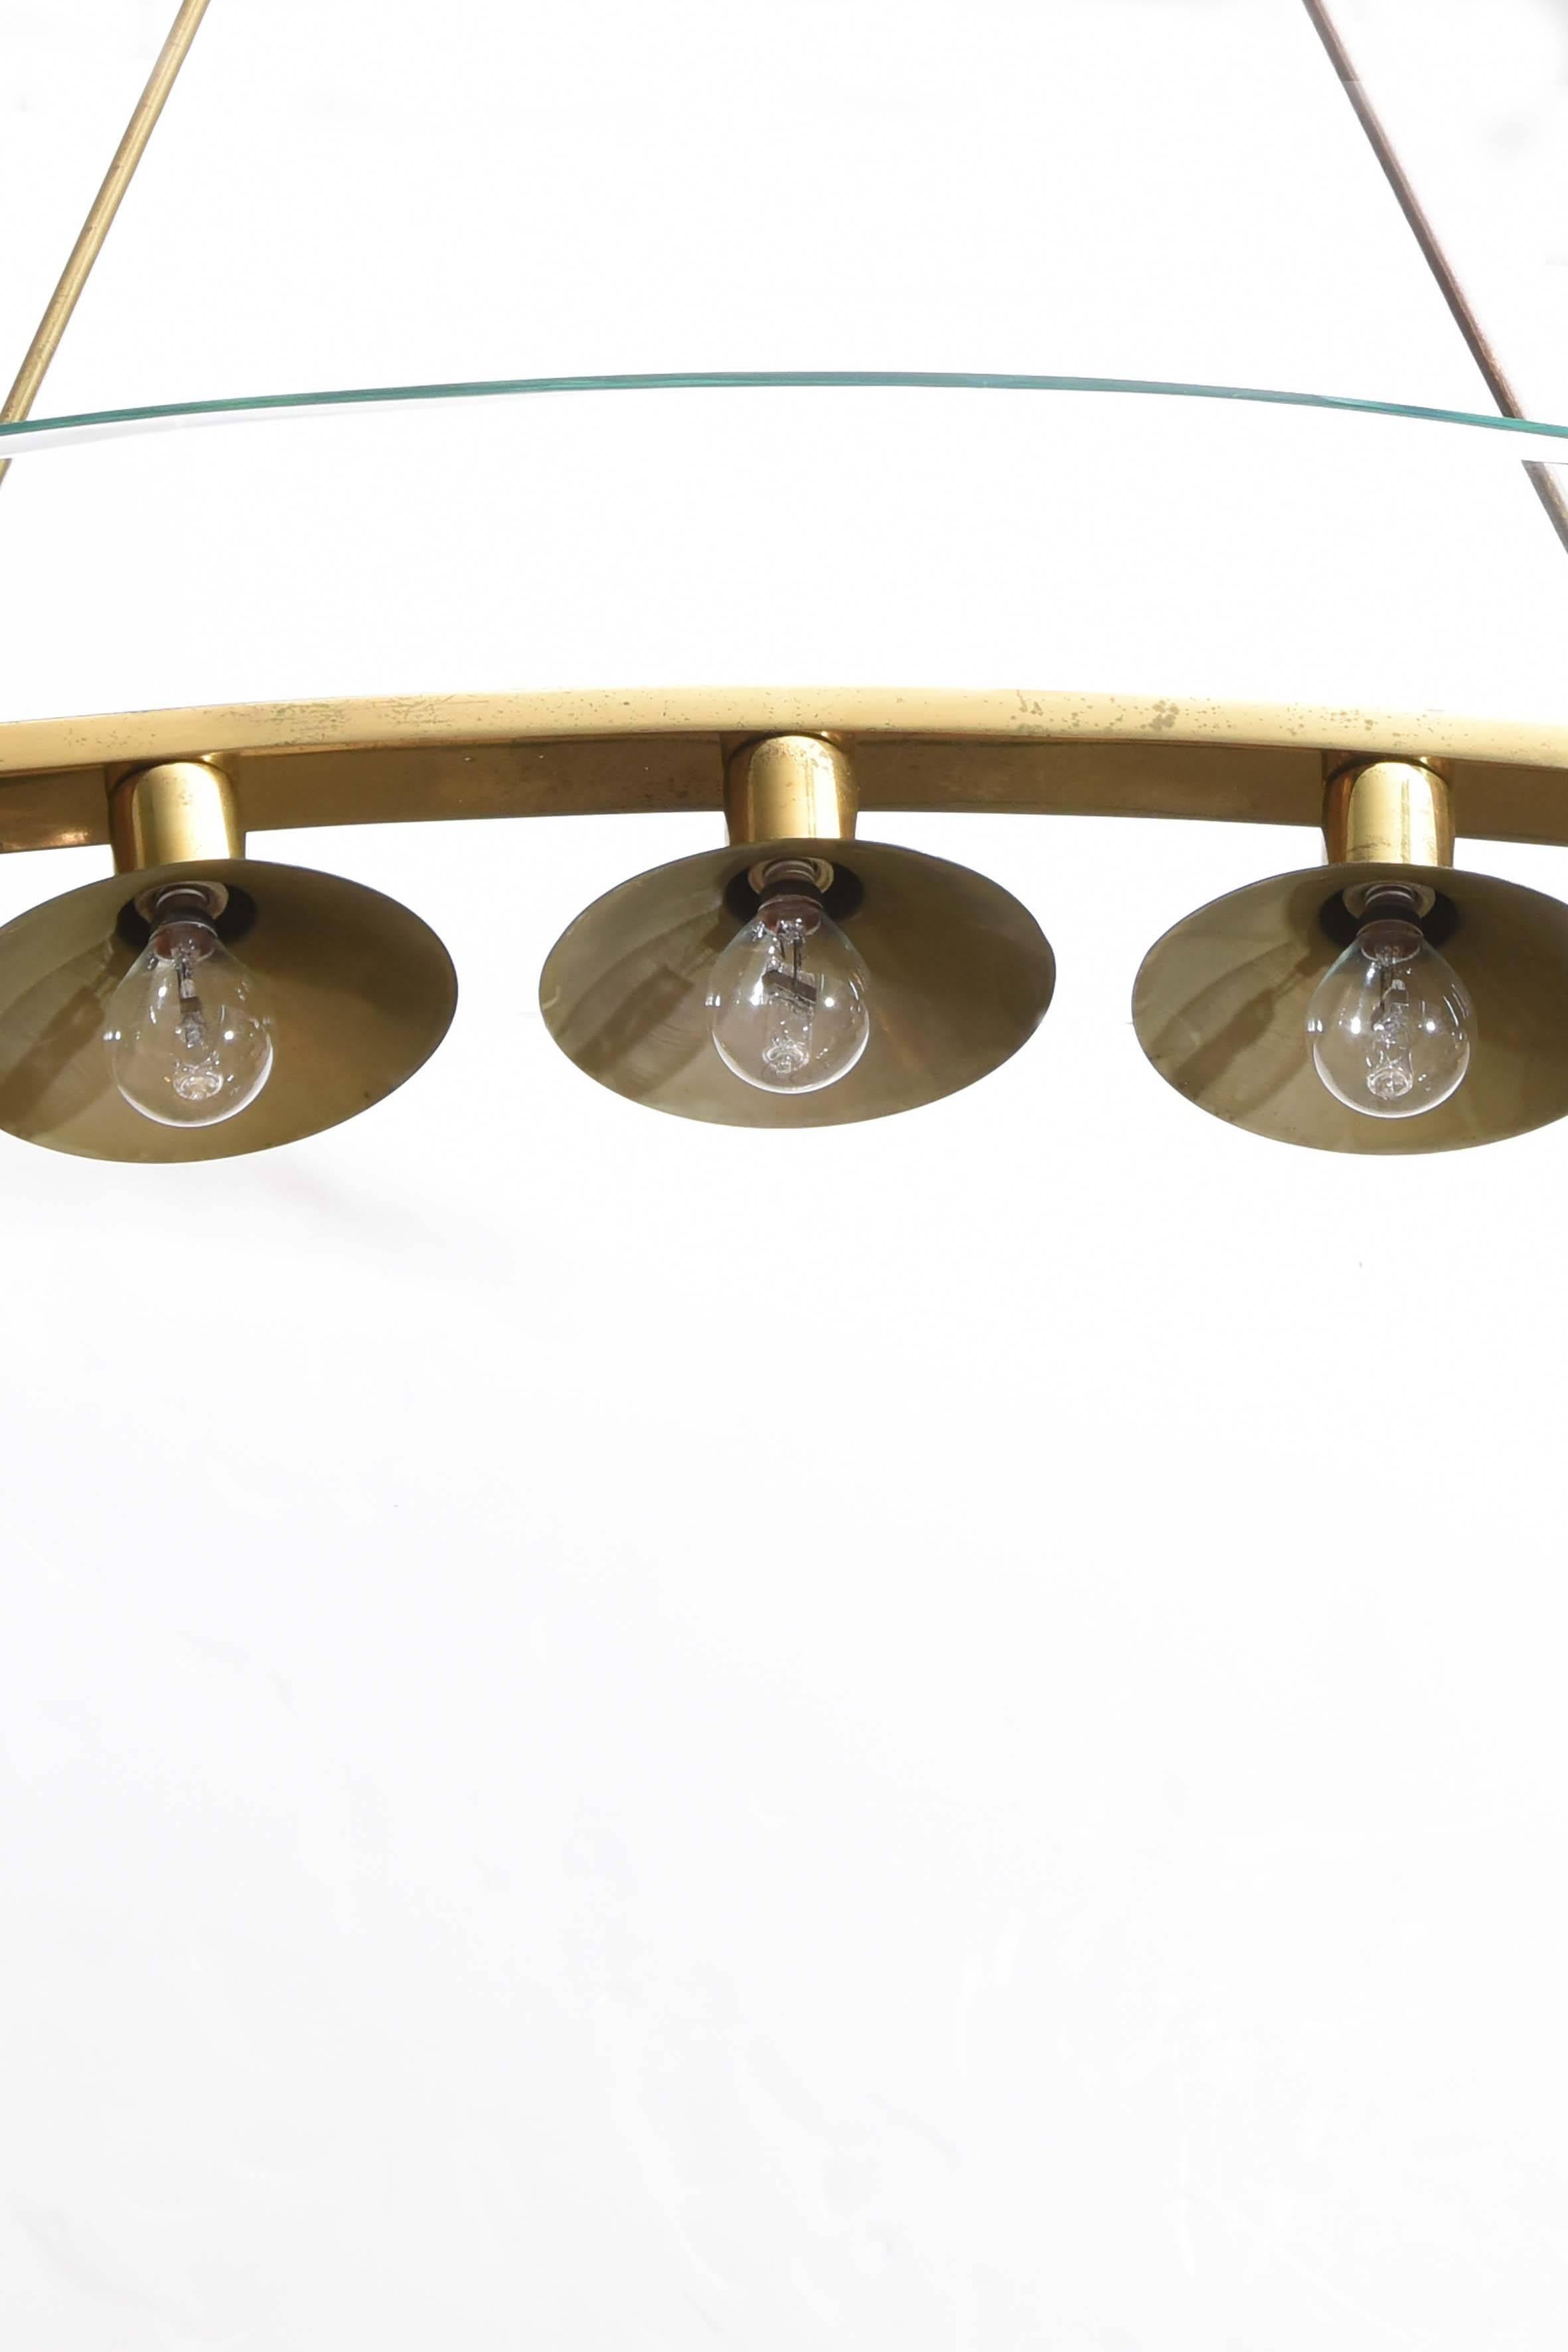 Fontana Arte Pietro Chiesa Five-Light Chandelier Glass and Brass In Good Condition For Sale In Milan, IT